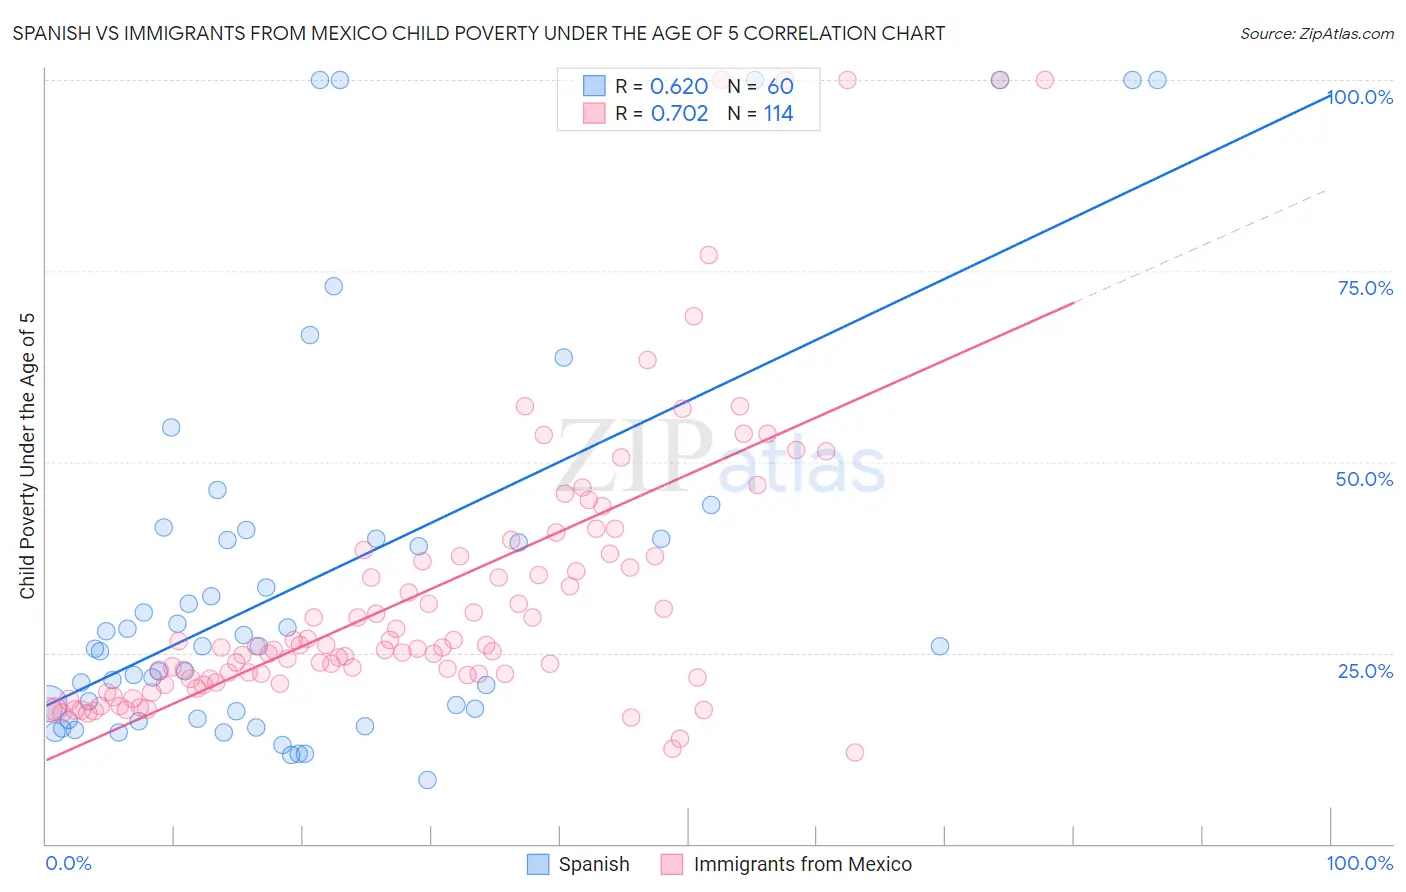 Spanish vs Immigrants from Mexico Child Poverty Under the Age of 5